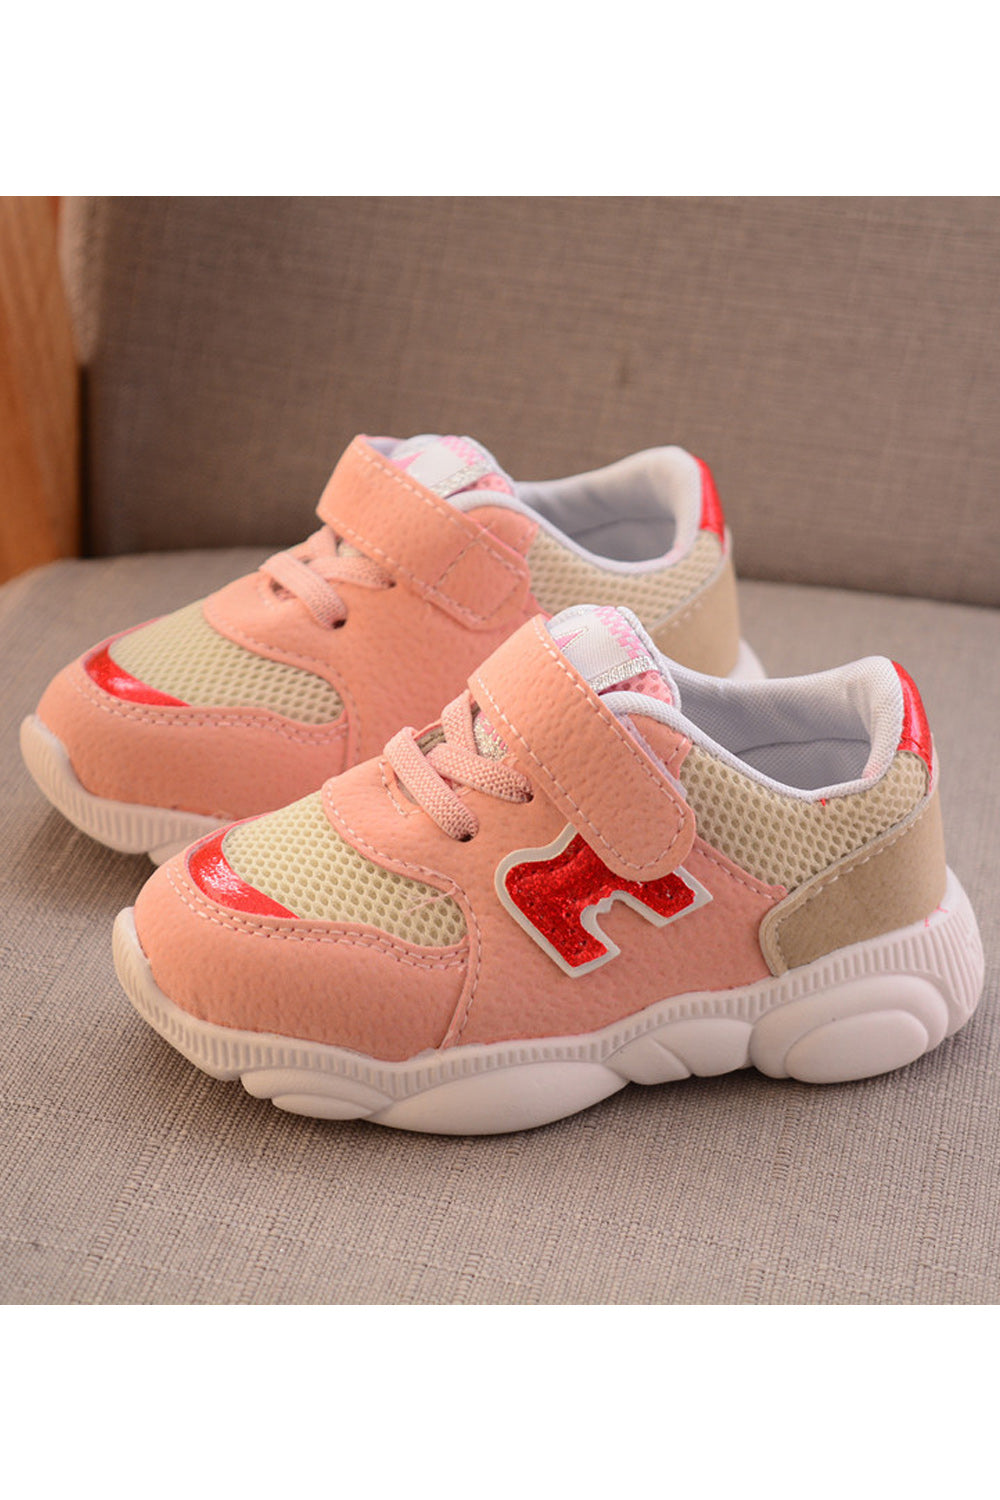 Toddler Girls Elegant Styled Solid Colored Rubber Surface Comfy Shoes